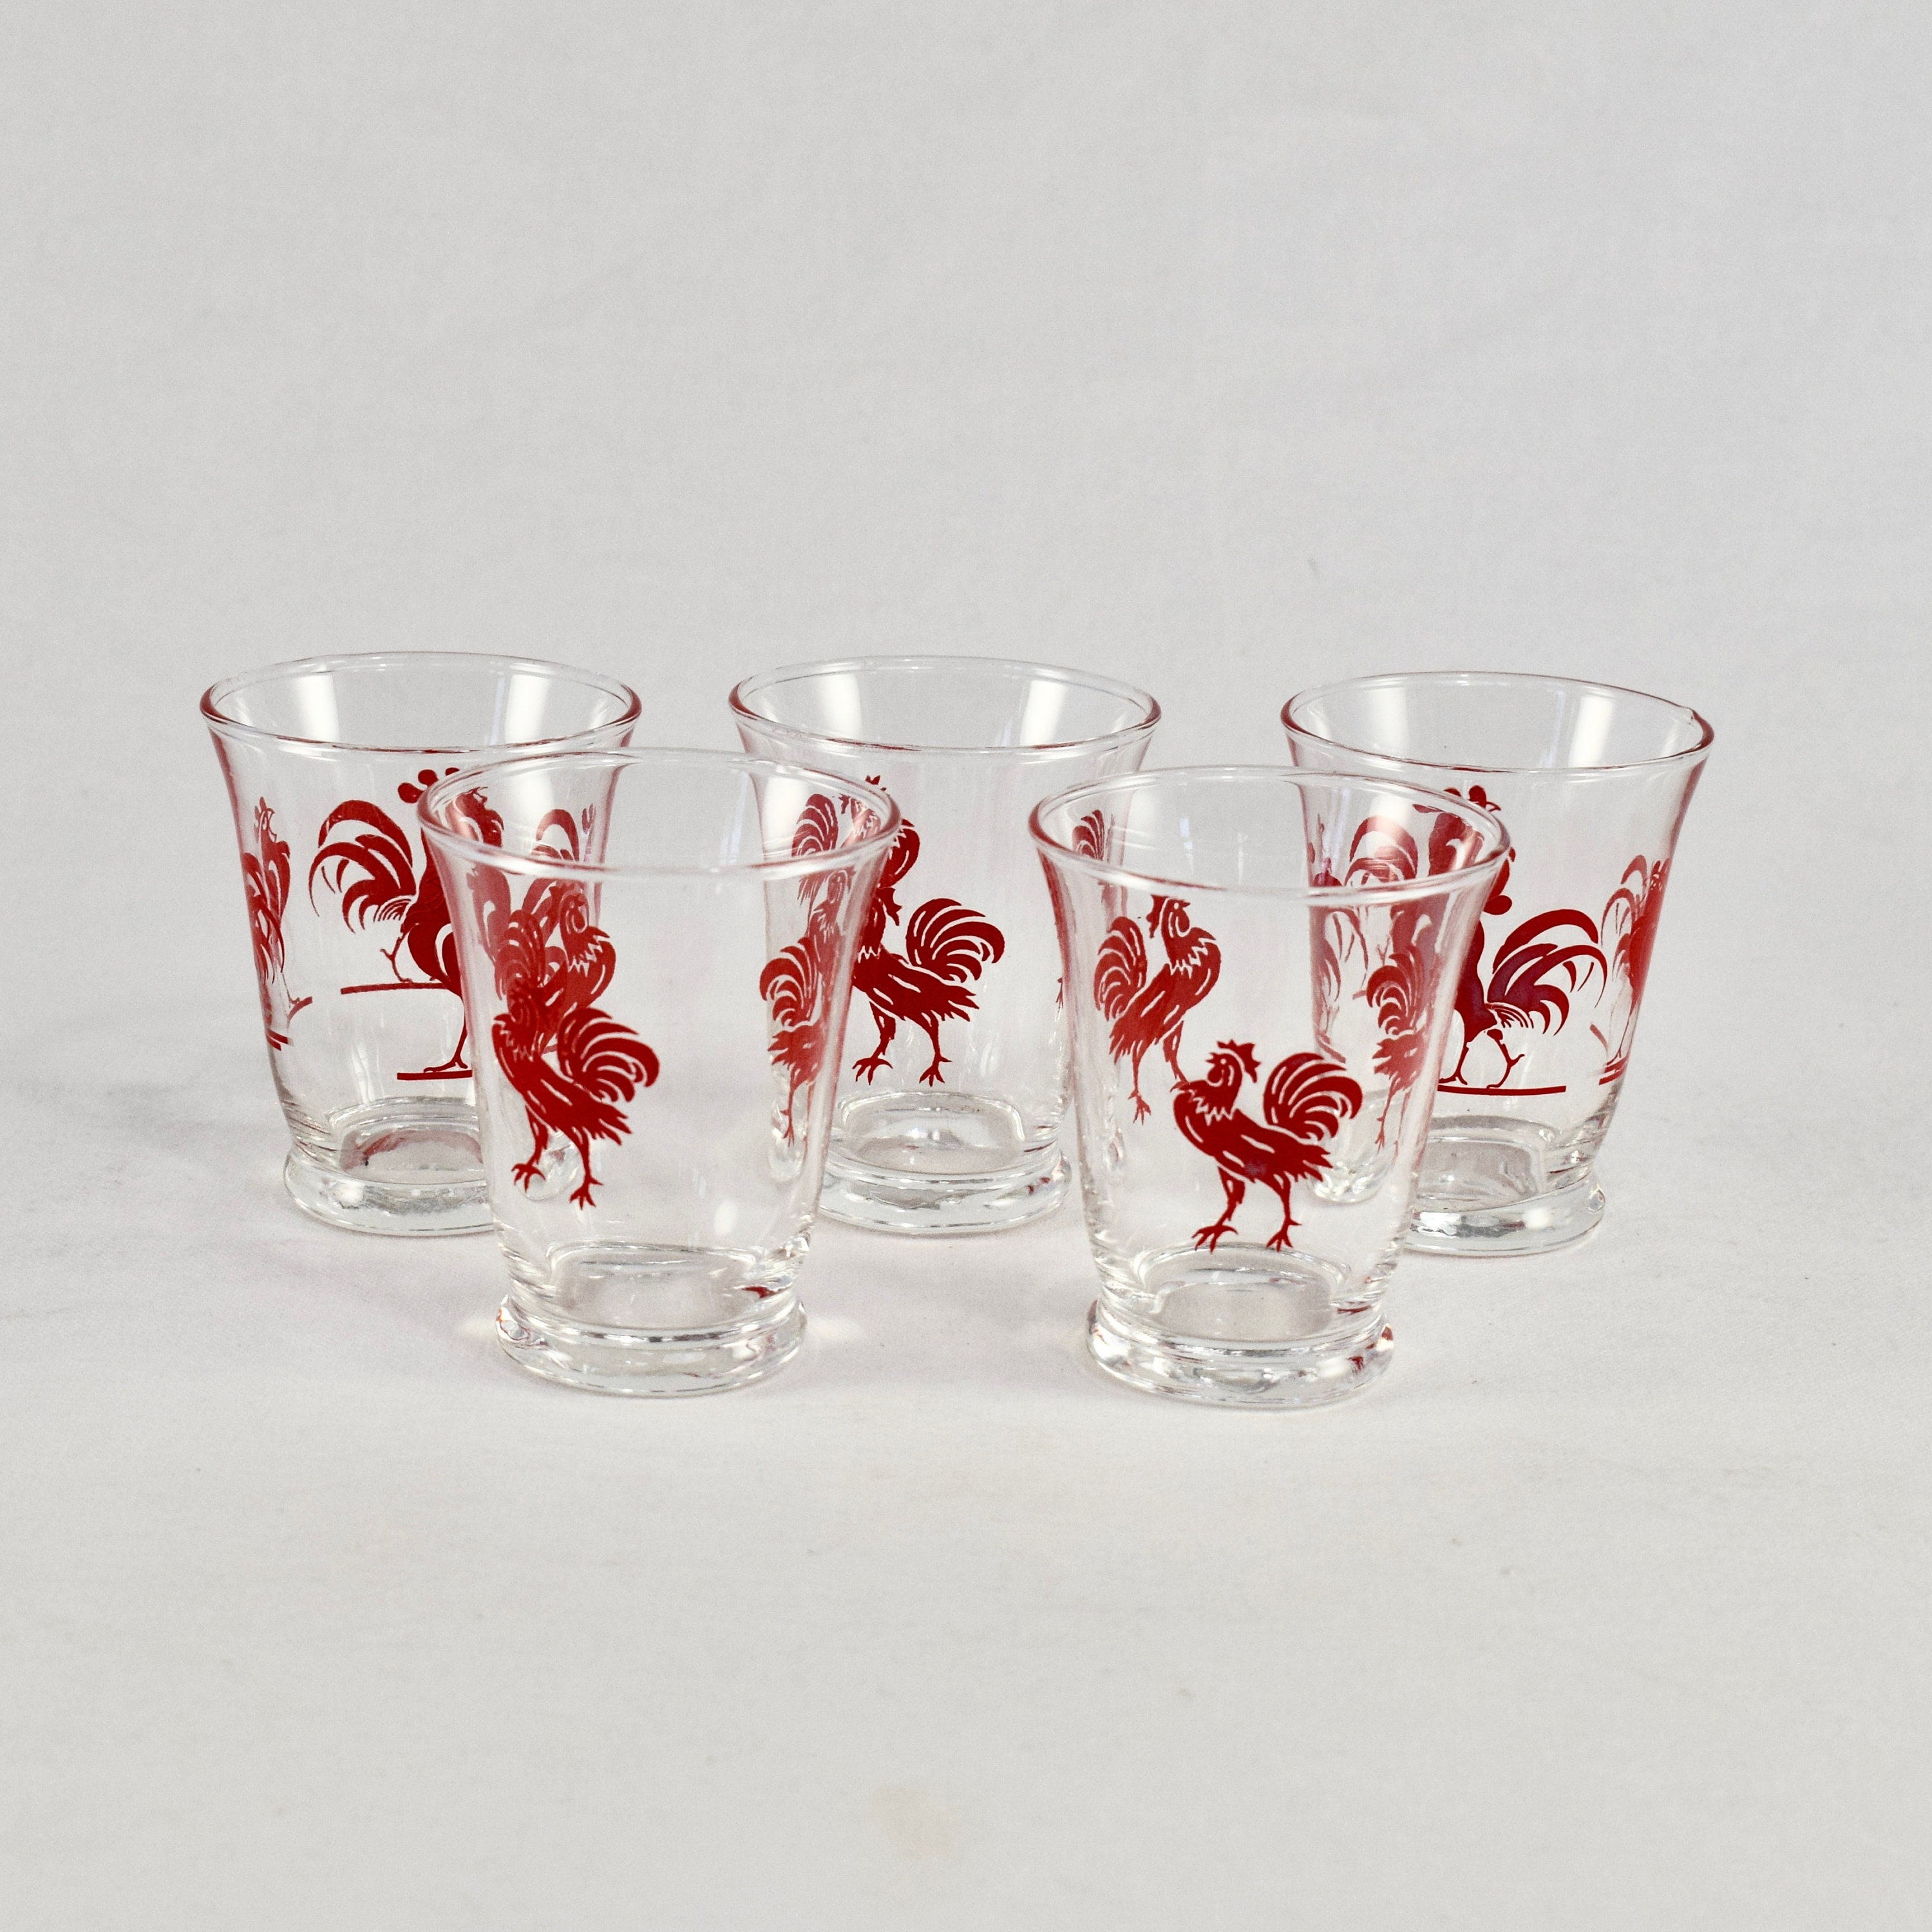 Buy Tall Shot Glass Set of Four Libbey Weathervane Rooster Archer